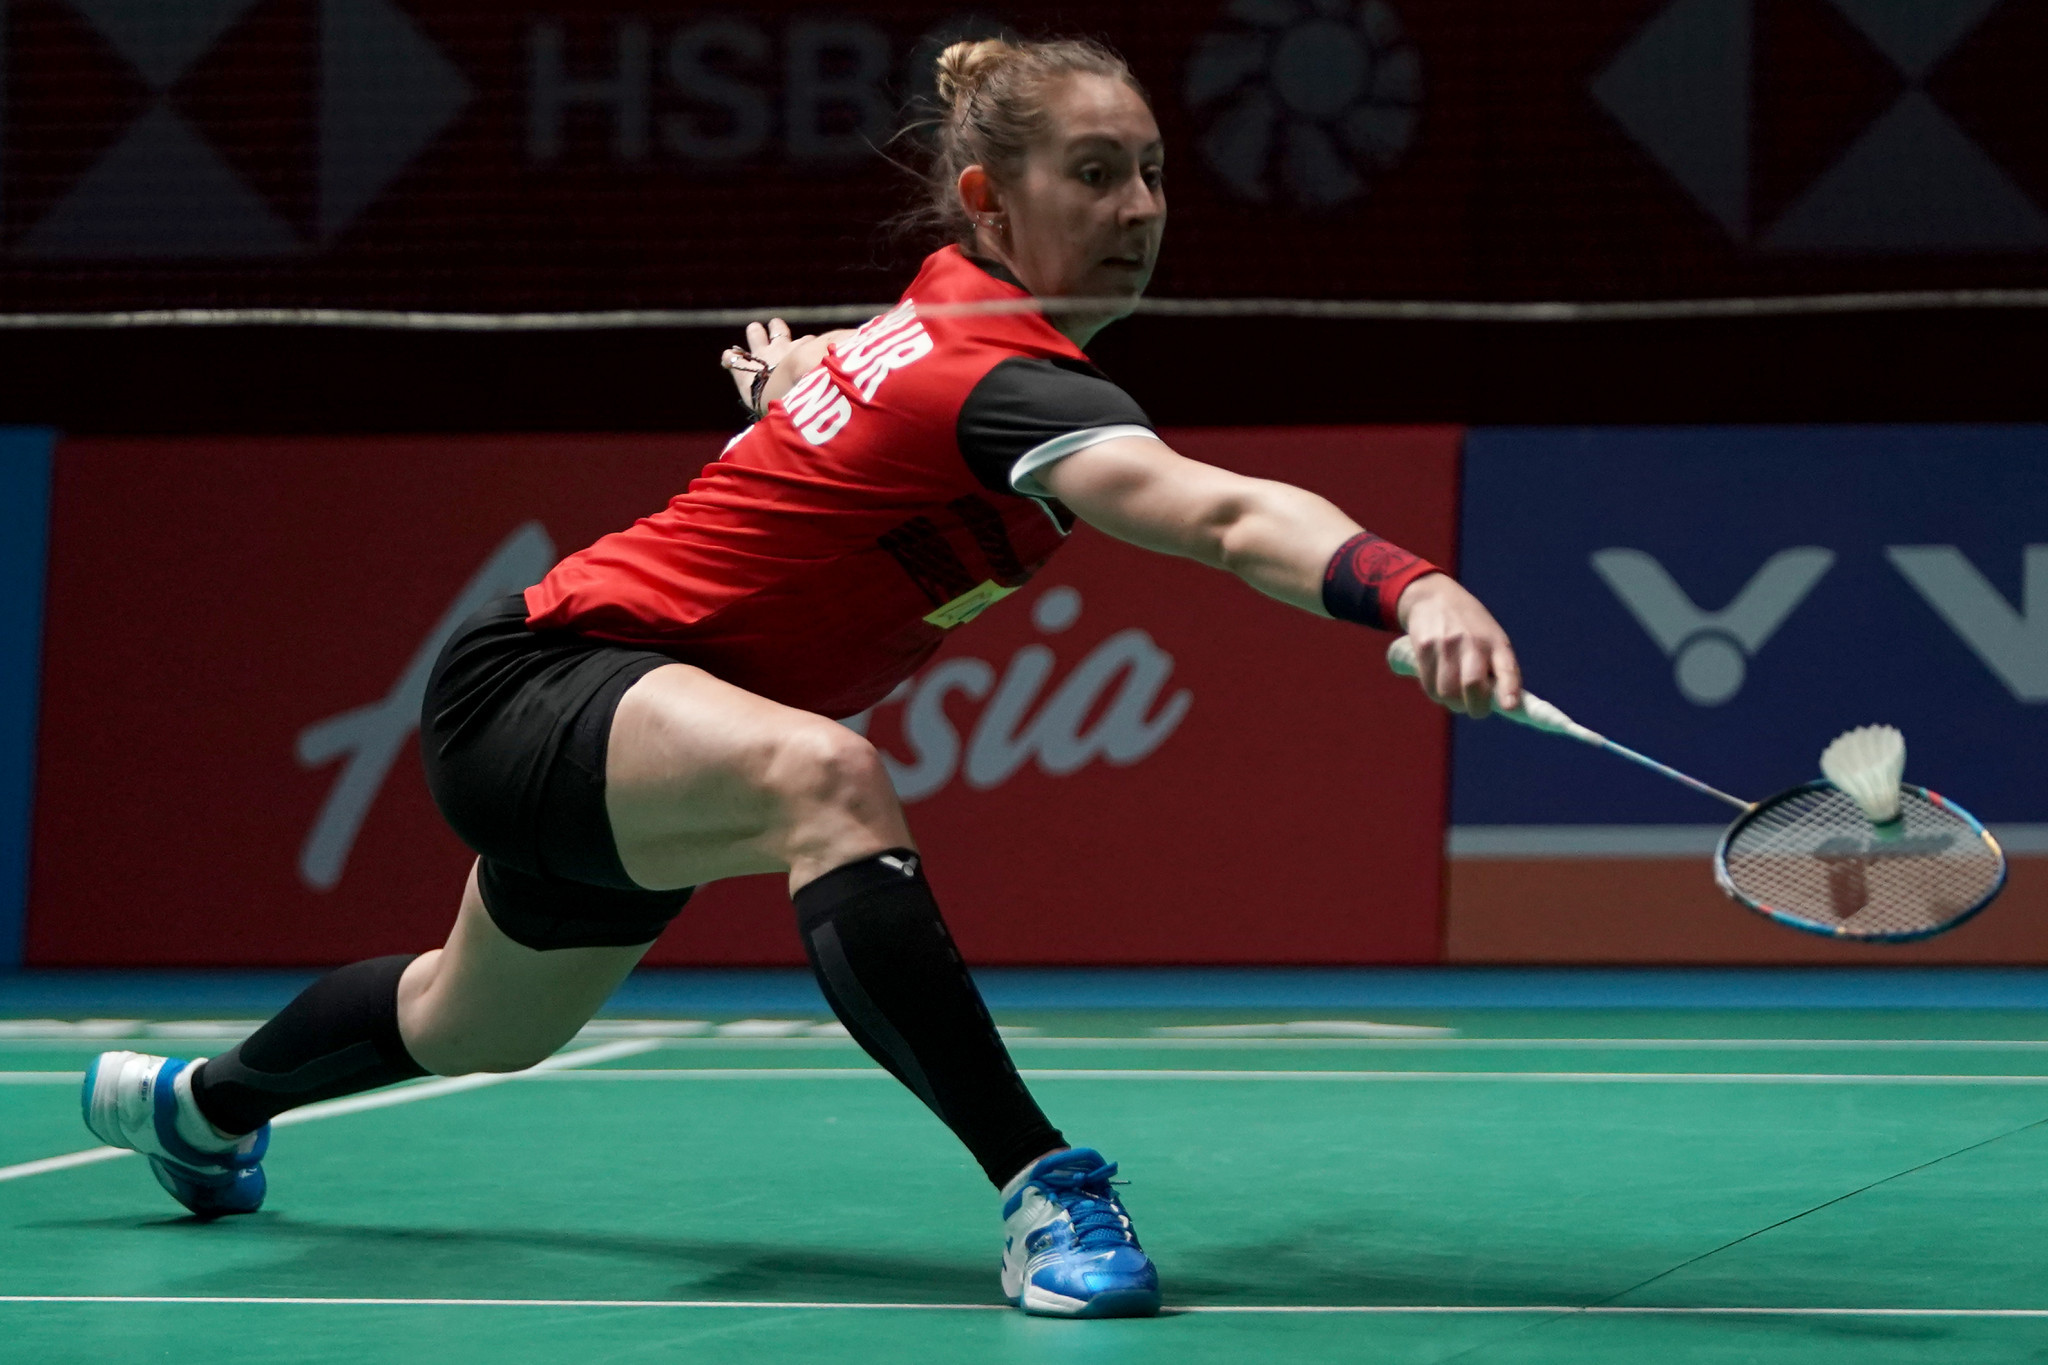 Scotland's Kirsty Gilmour won the first match of the tie against India, before India bounced back to win 4-1 in their latest Uber Cup group game ©Getty Images  